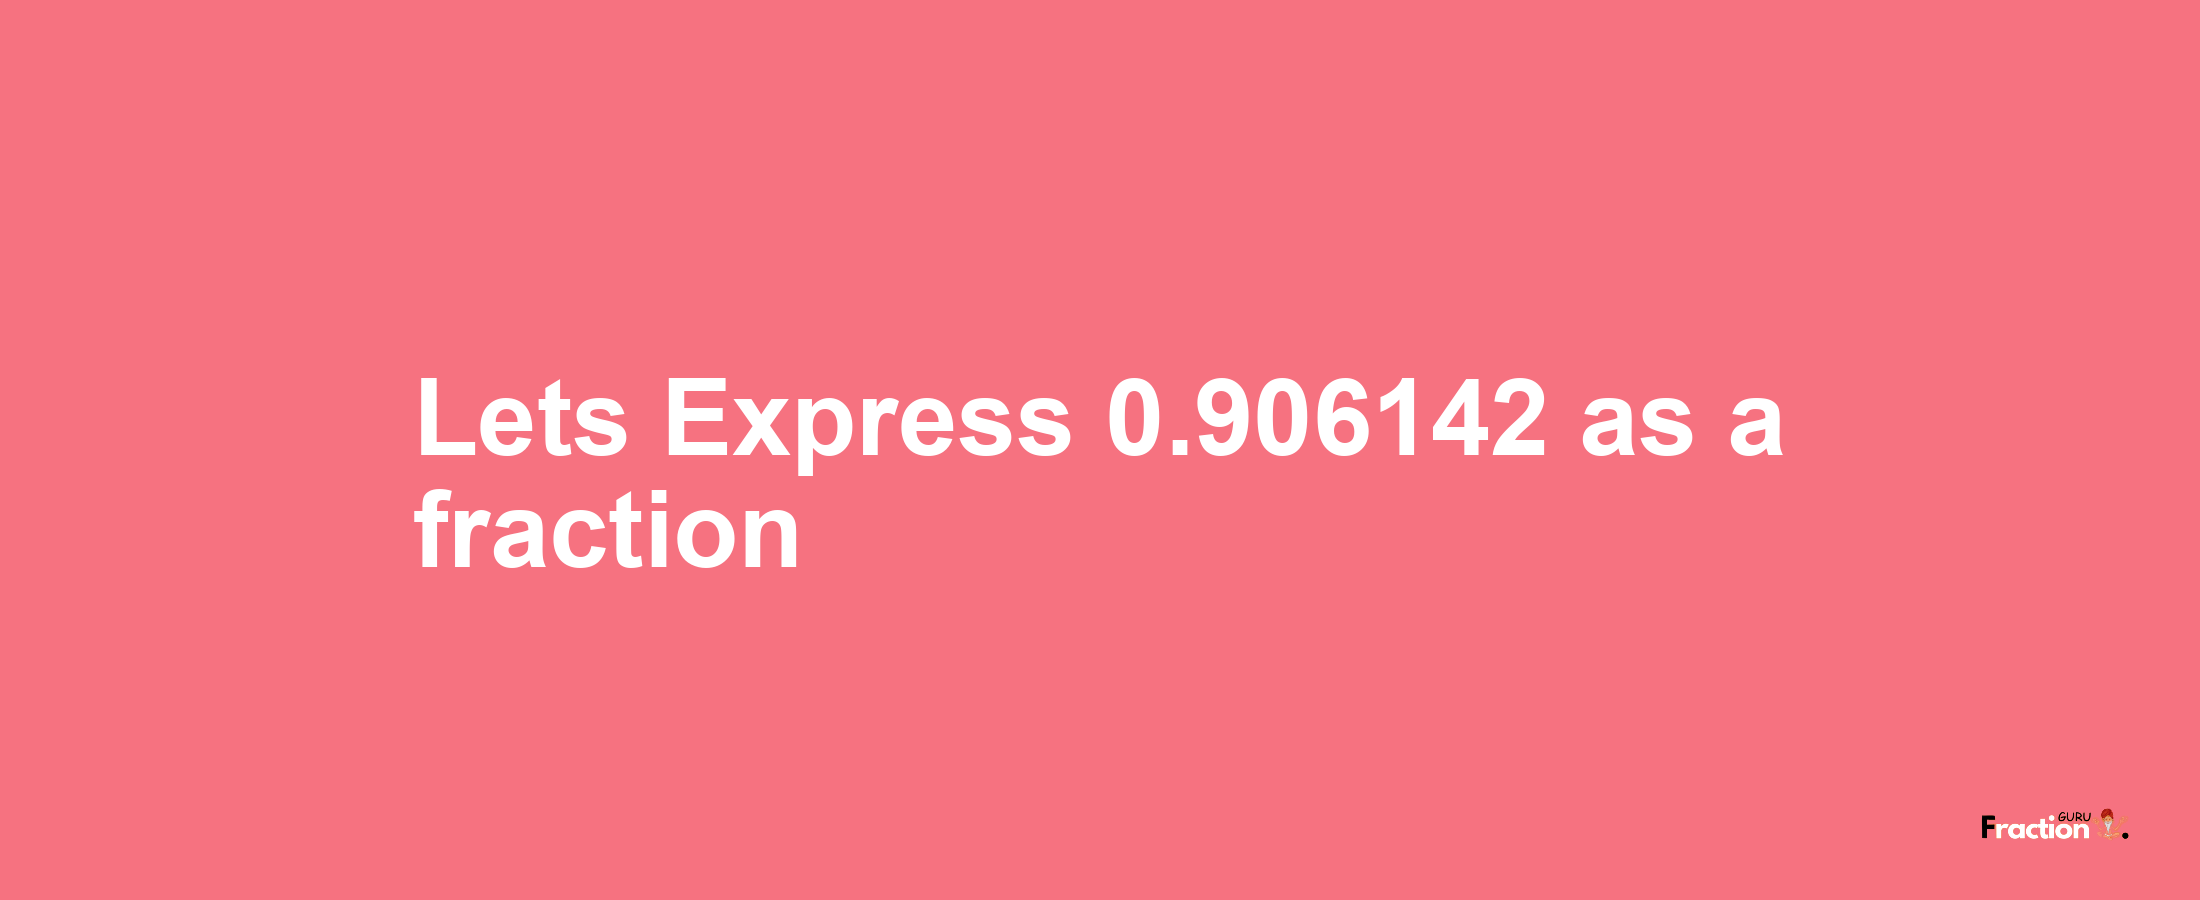 Lets Express 0.906142 as afraction